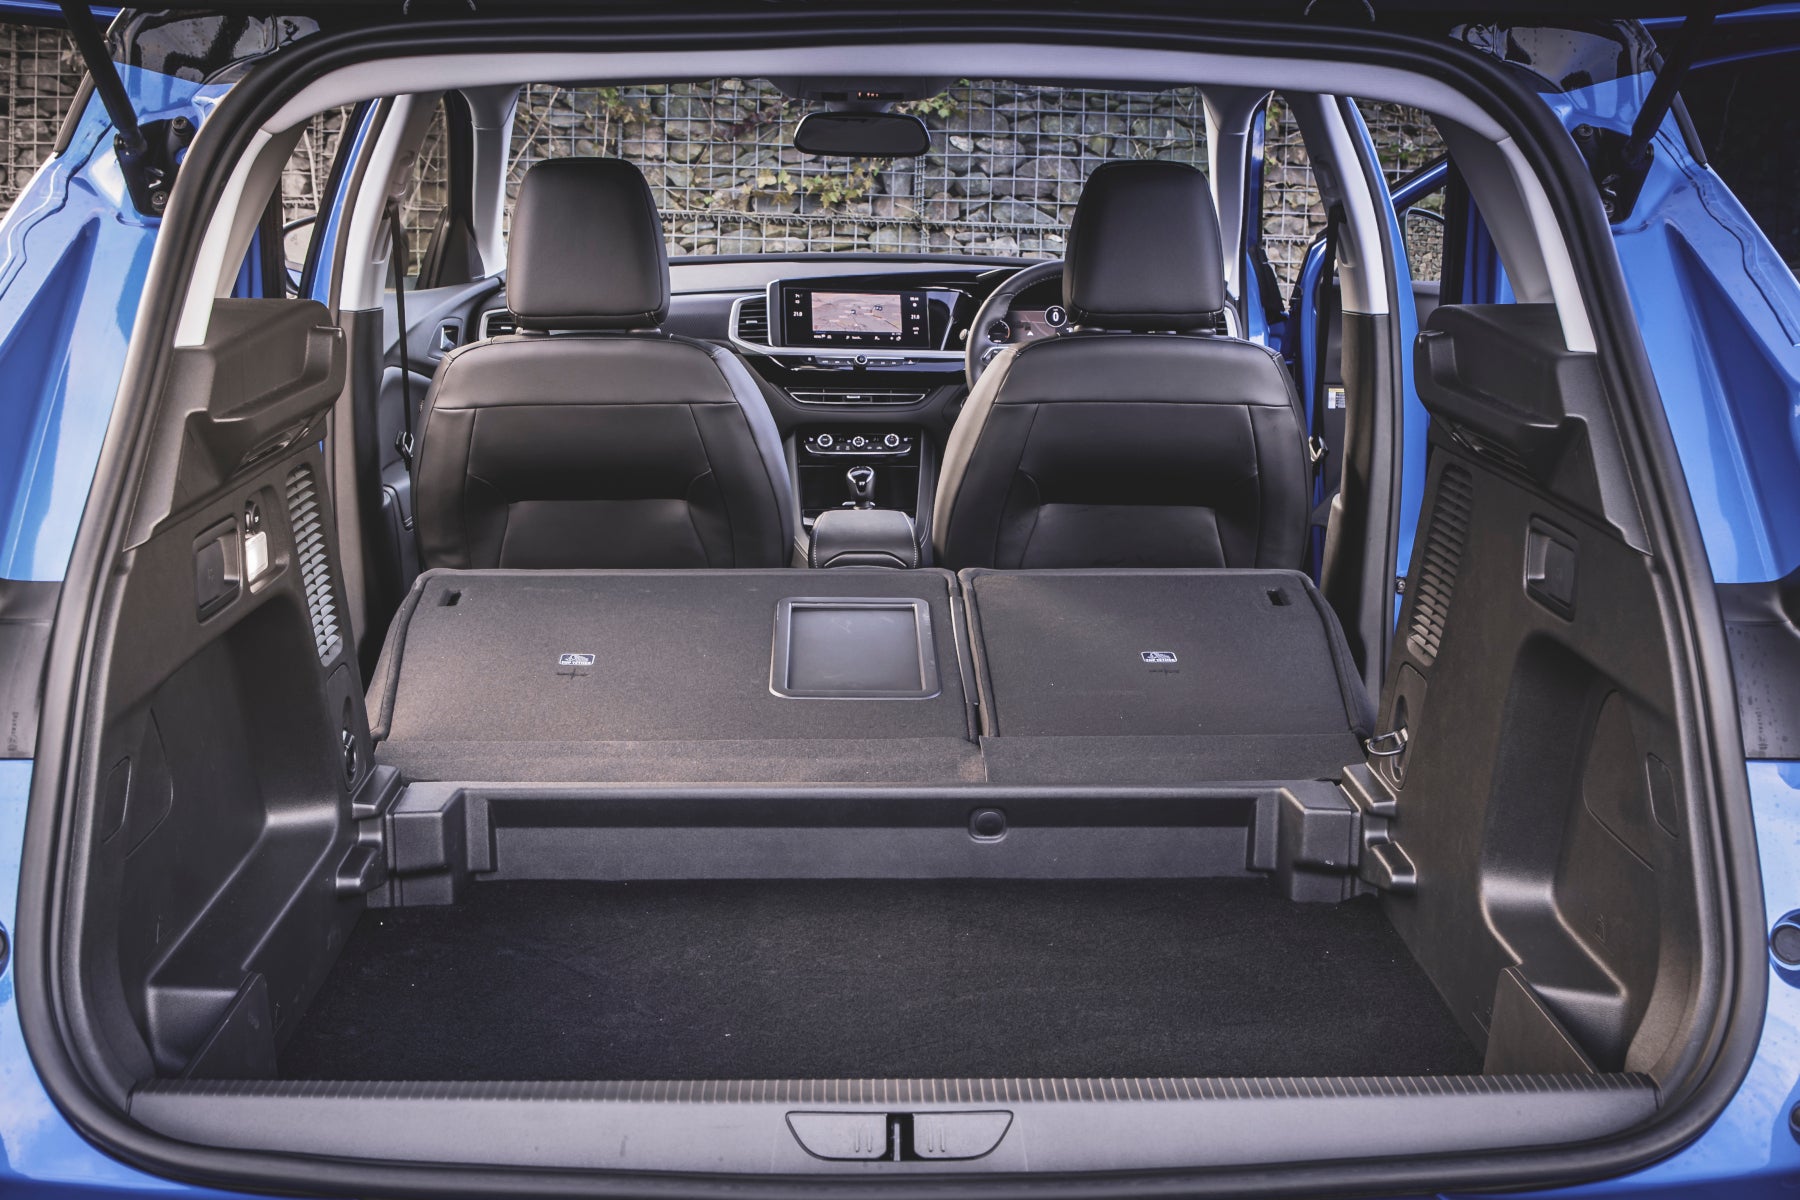 Vauxhall Grandland Review 2022 - rear seats down boot space